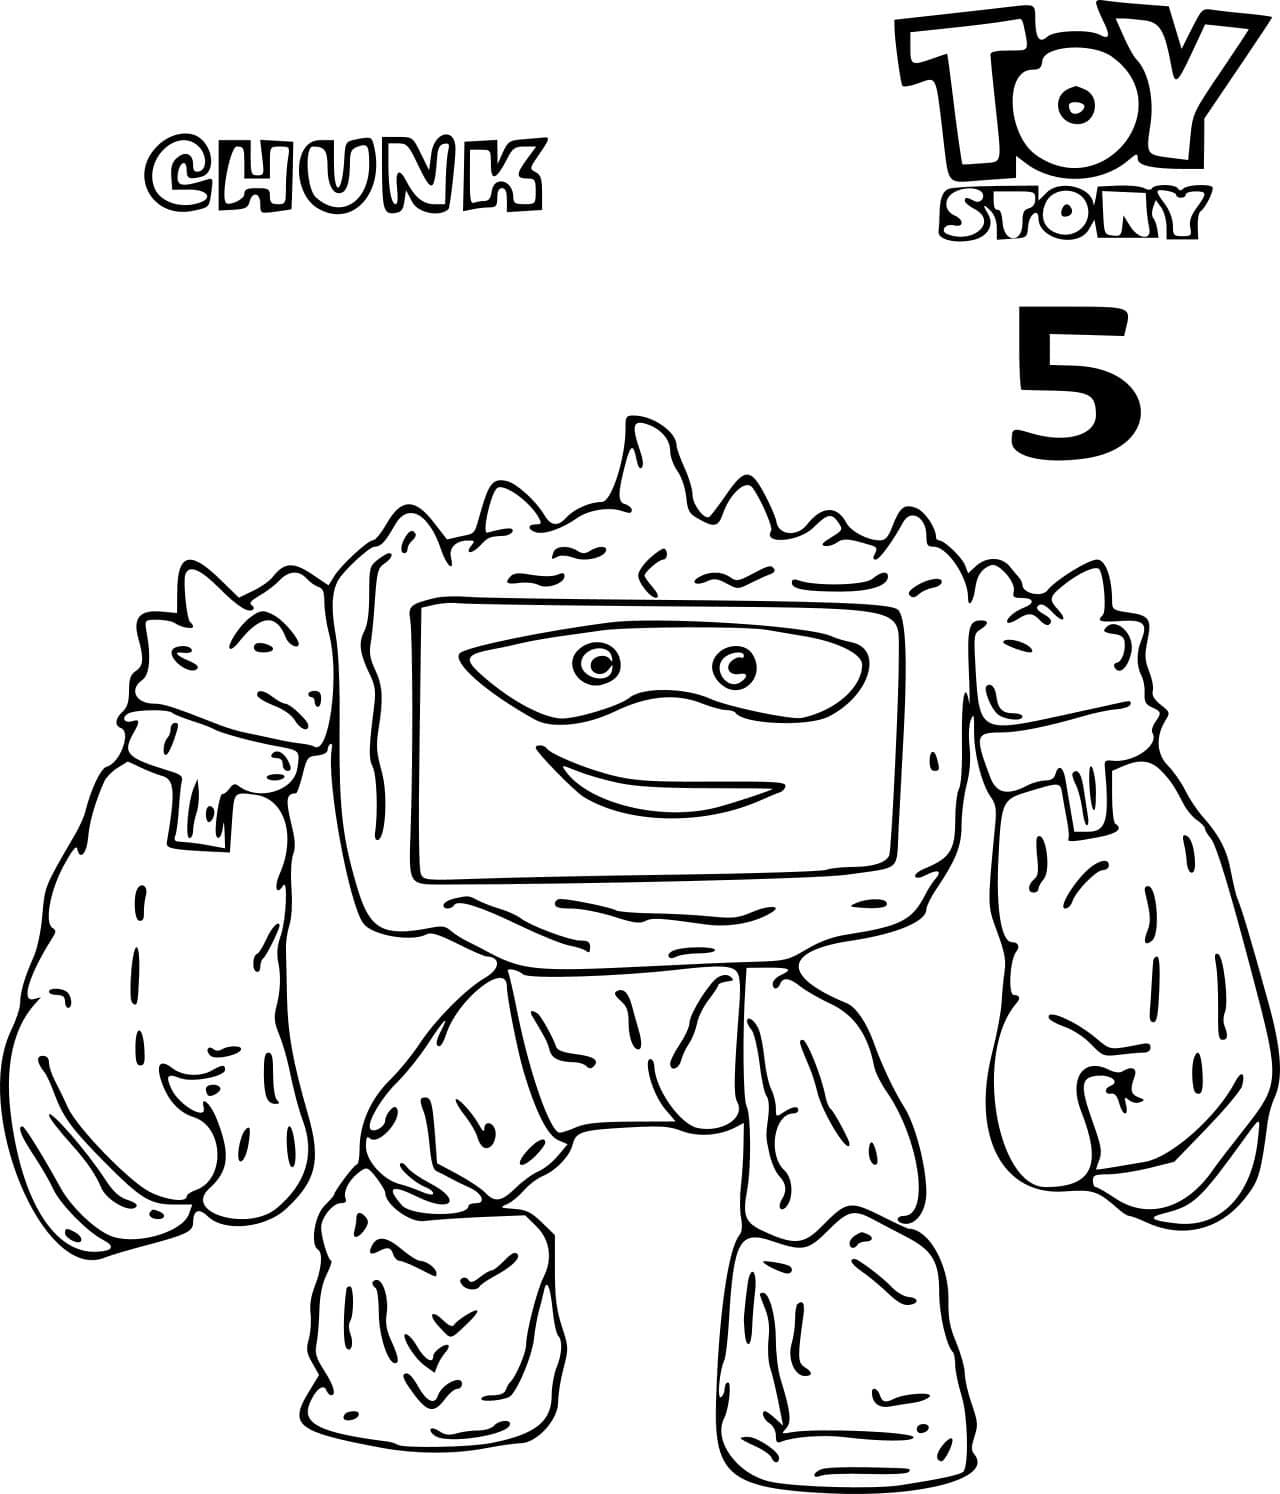 chunk Toy Story 5 coloring pages